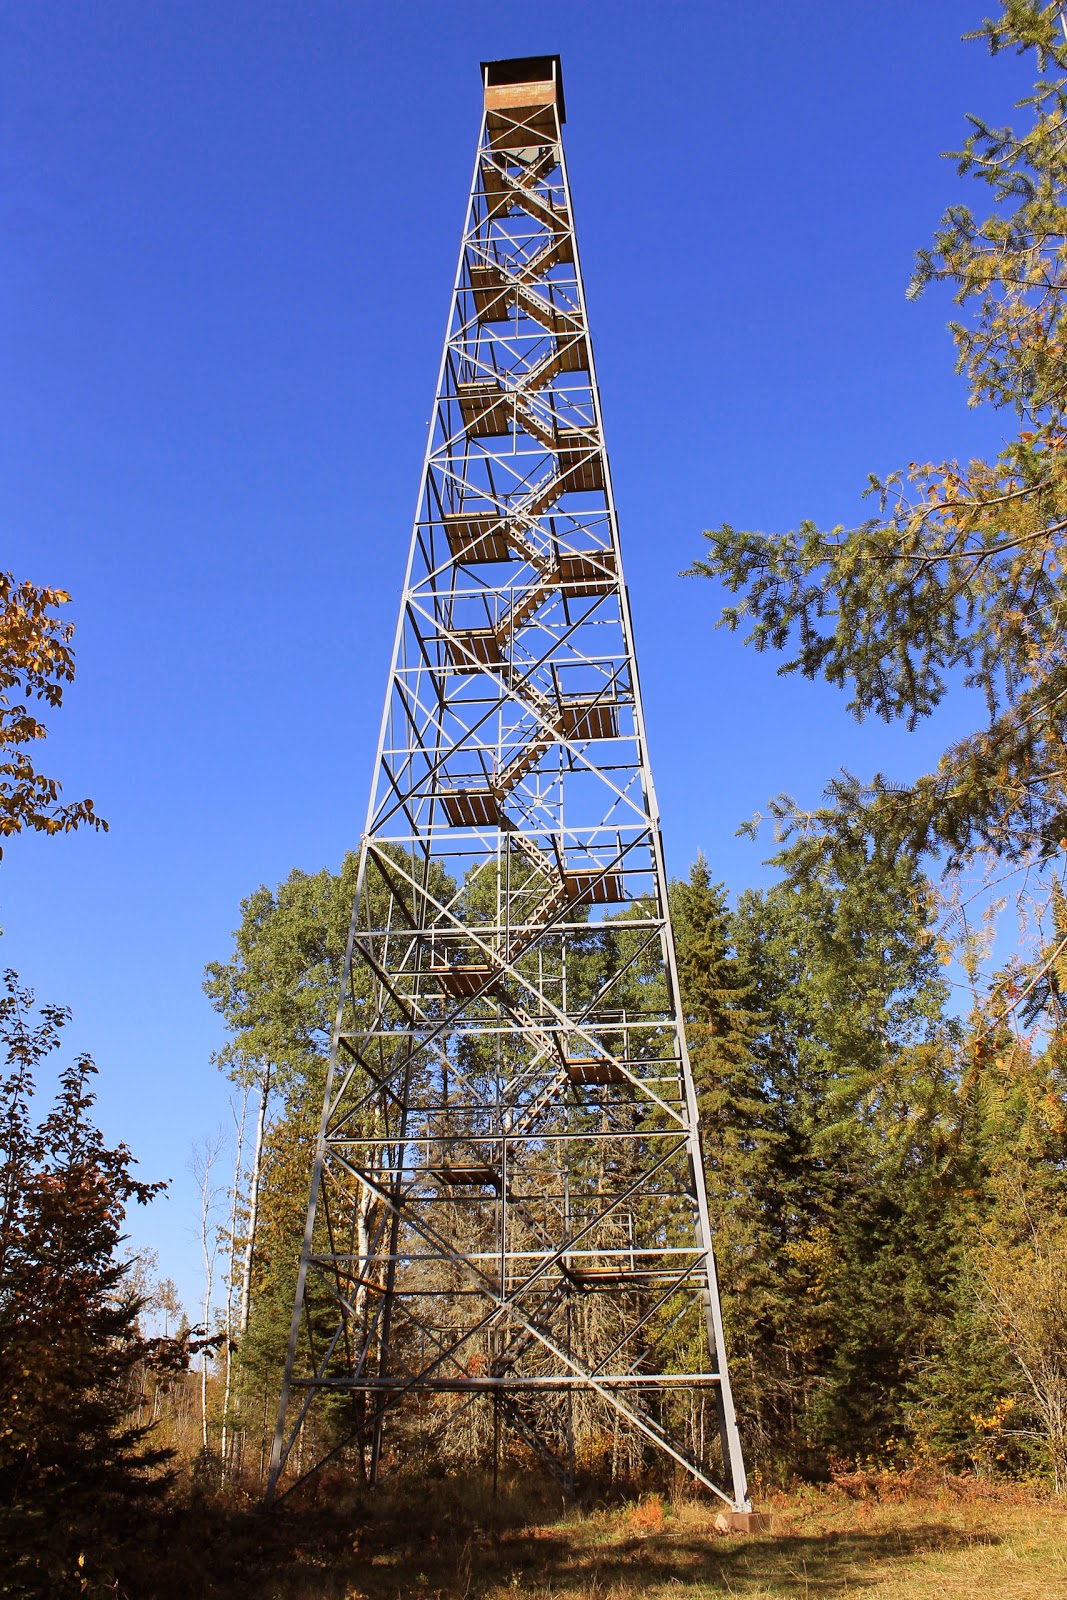 Minnesota's Historical Fire Lookout Towers: August 2012